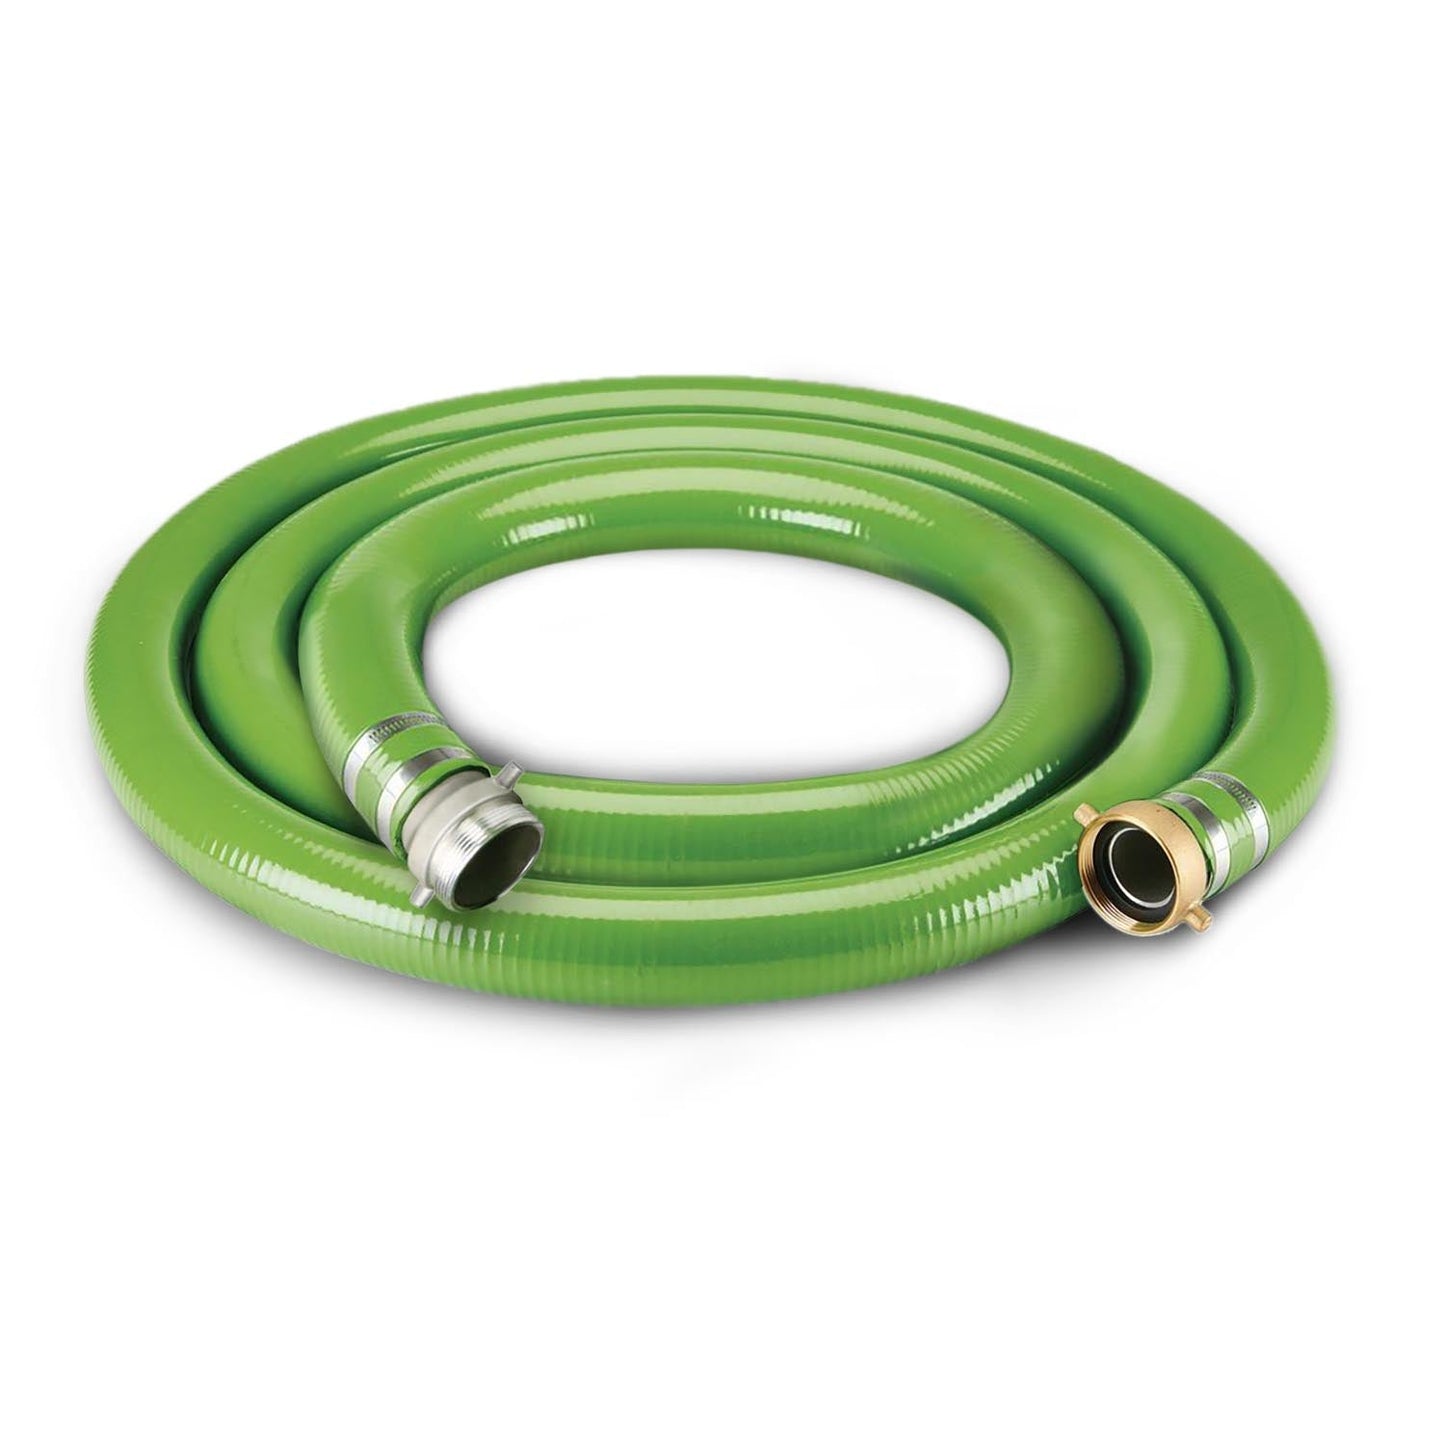 Foresee PVC 20 FT Suction Hose with Pin Lug Couplings